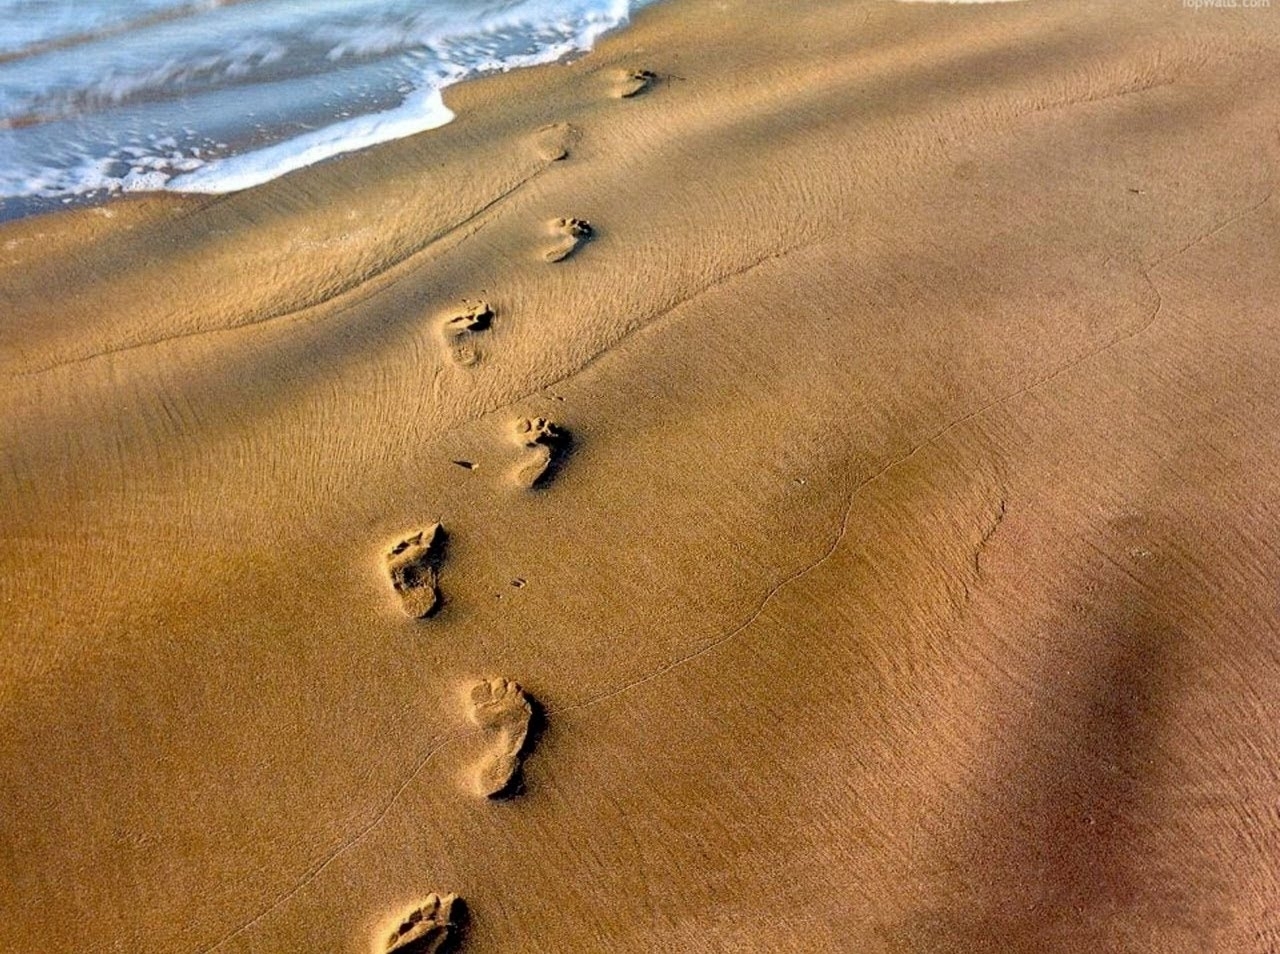 10 Most Popular And Most Recent Footprints In The Sand Pictures for Desktop...